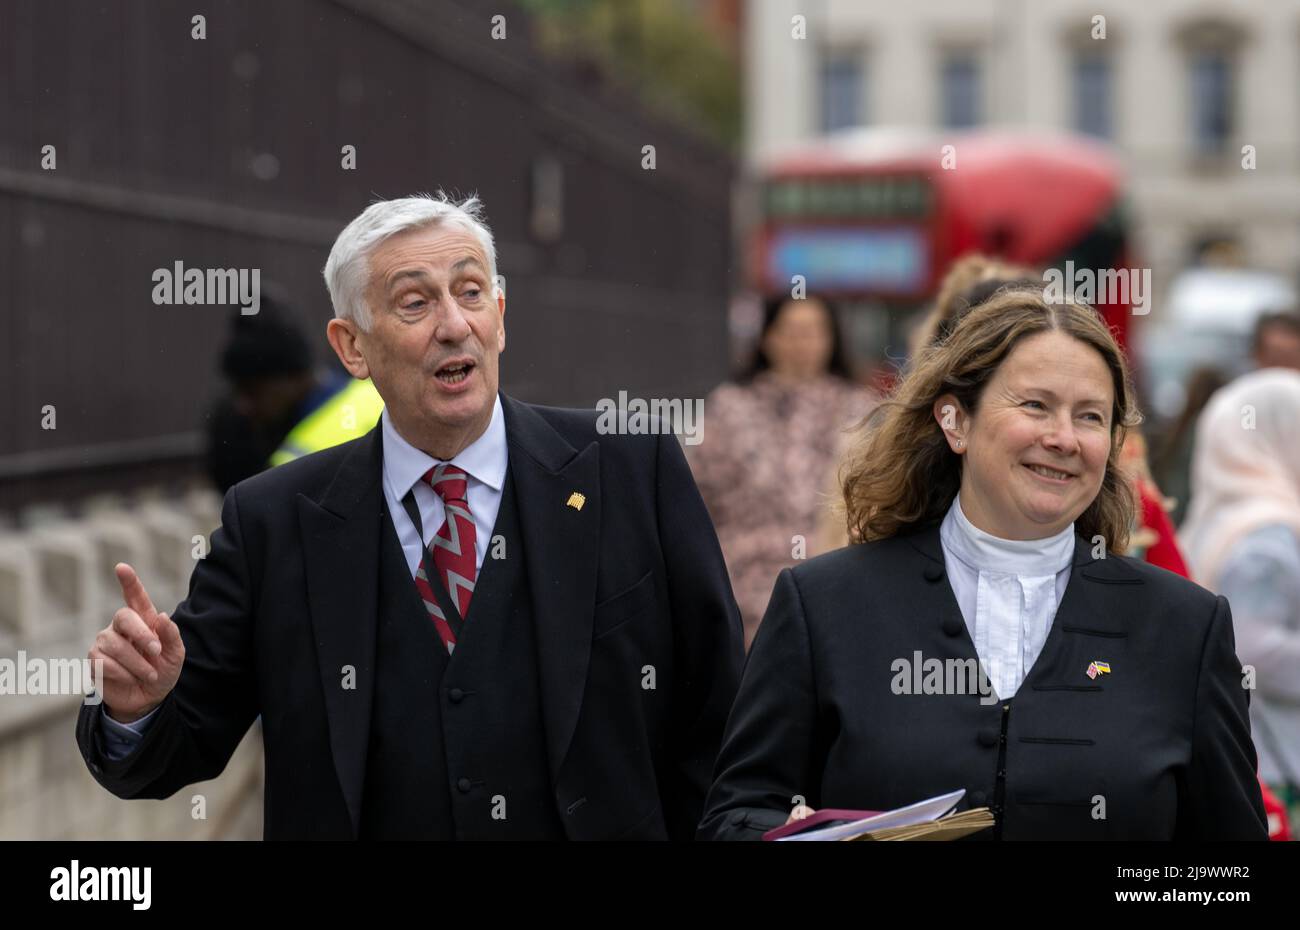 London, UK. 25th May, 2022. MP's outside the House of Commons on the day the Partygate report release Pictured Lindsay Hoyle MP for Chorley and Speaker of the House of Commons, Credit: Ian Davidson/Alamy Live News Stock Photo